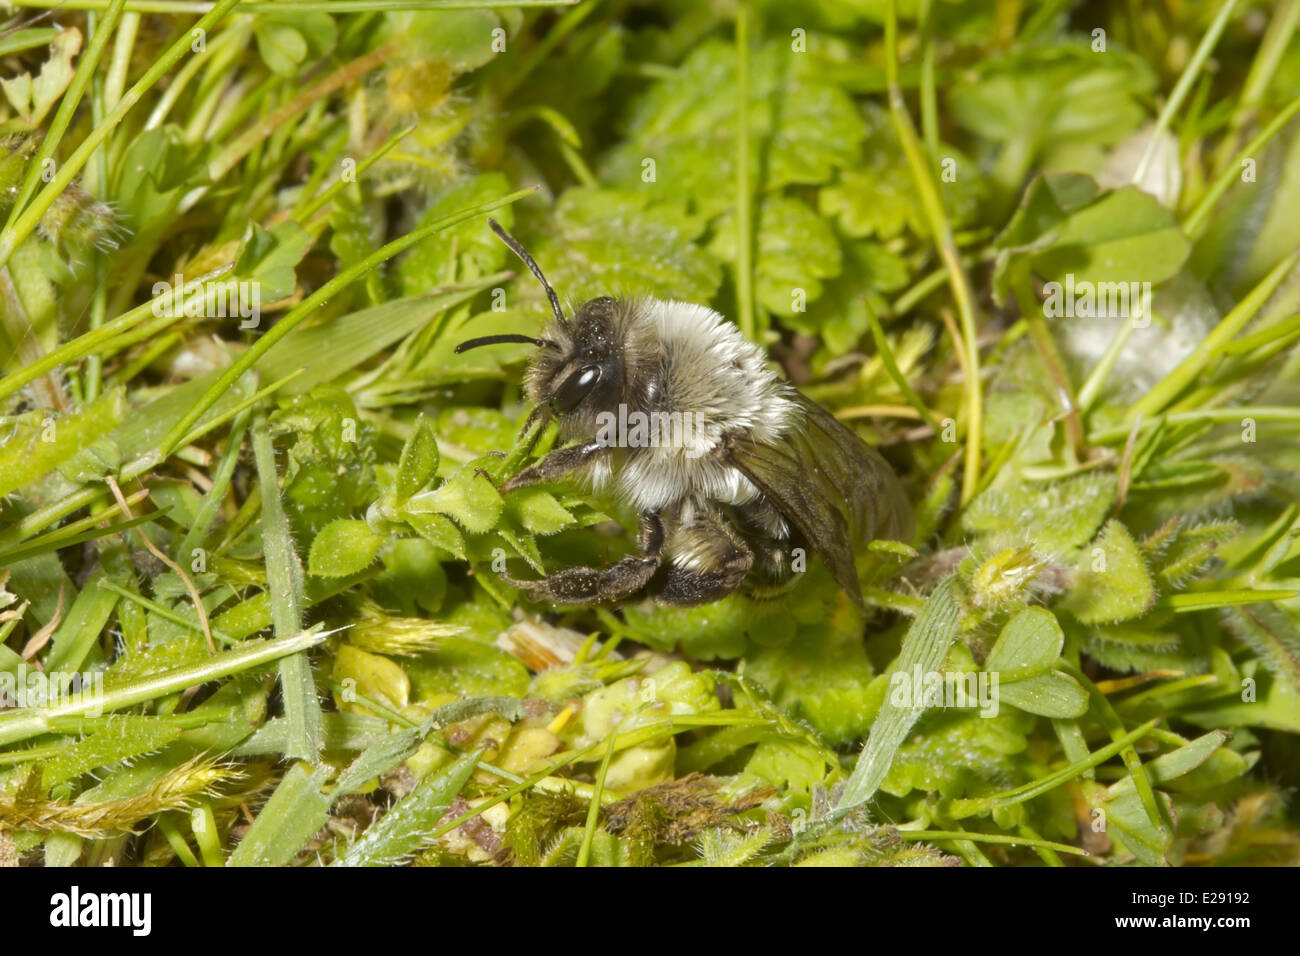 Grey Mining Bee (Andrena vaga) adult, extinct in UK since 1946 and first seen again this year at two sites, Dungeness RSPB Reserve, Kent, England, April 2014 Stock Photo